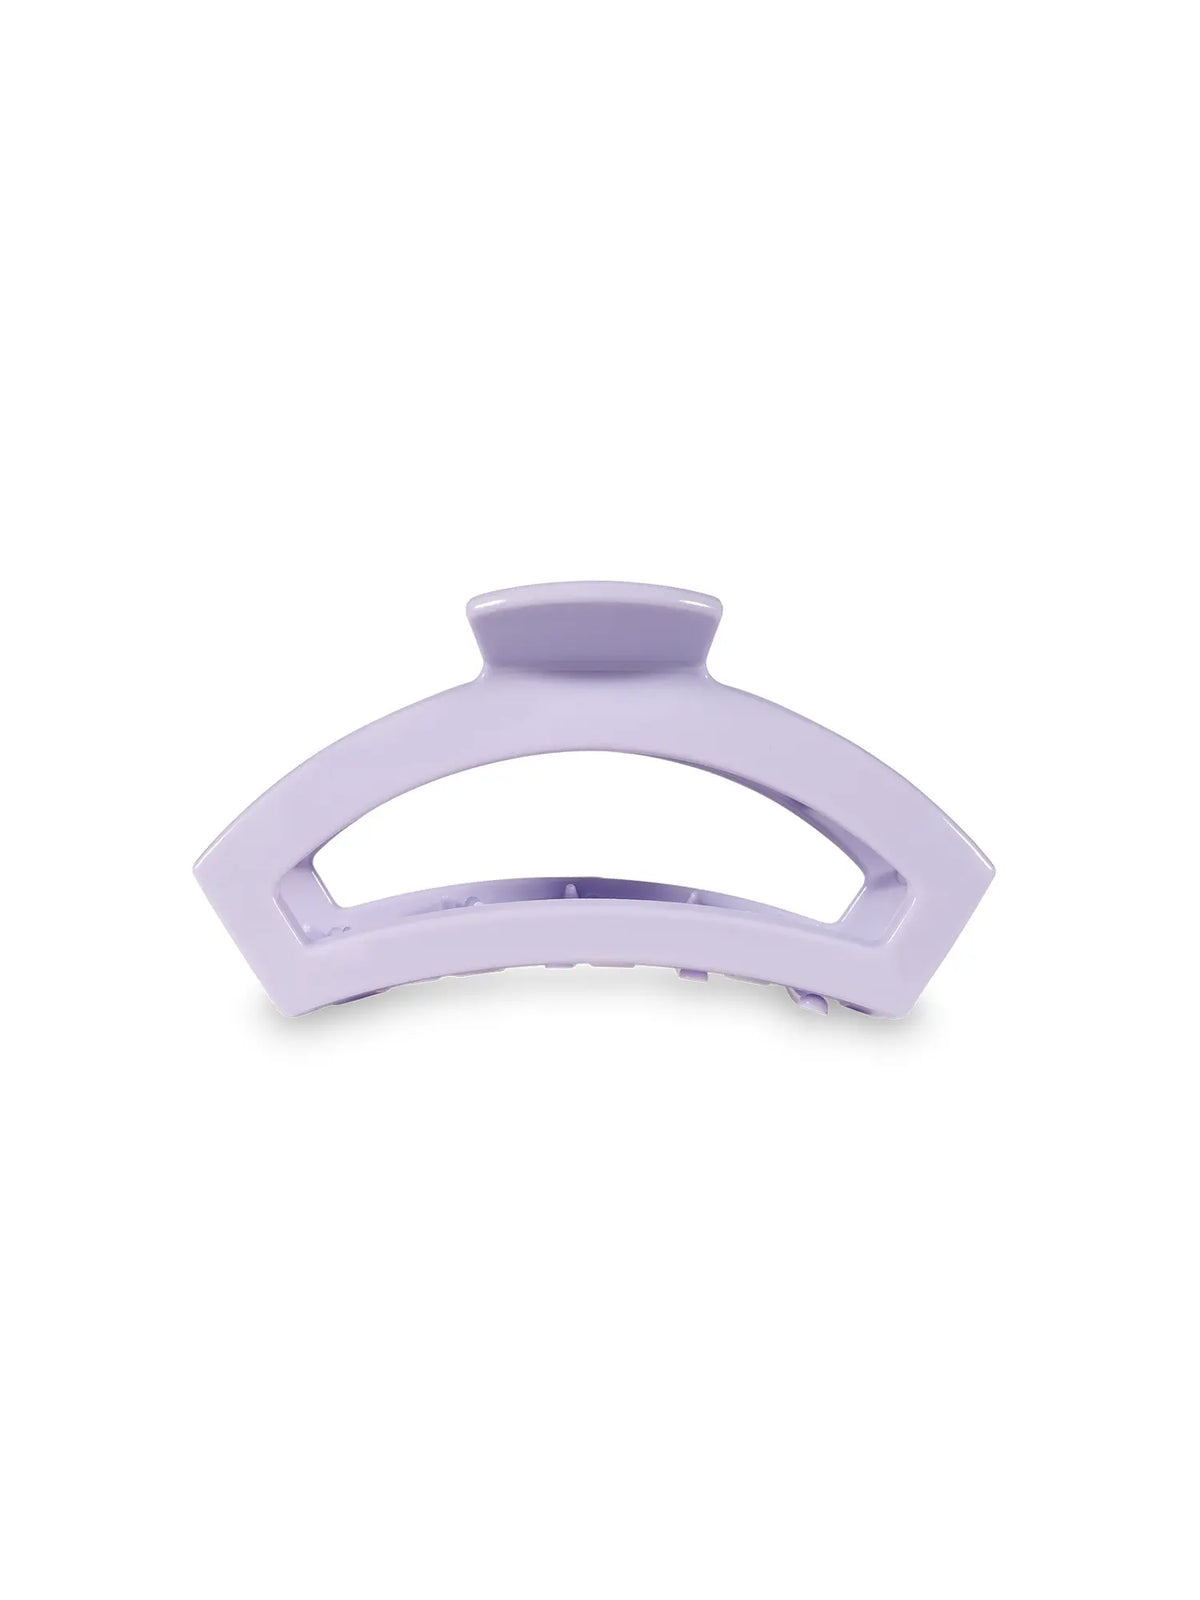 TELETIES lilac you large open hair clip